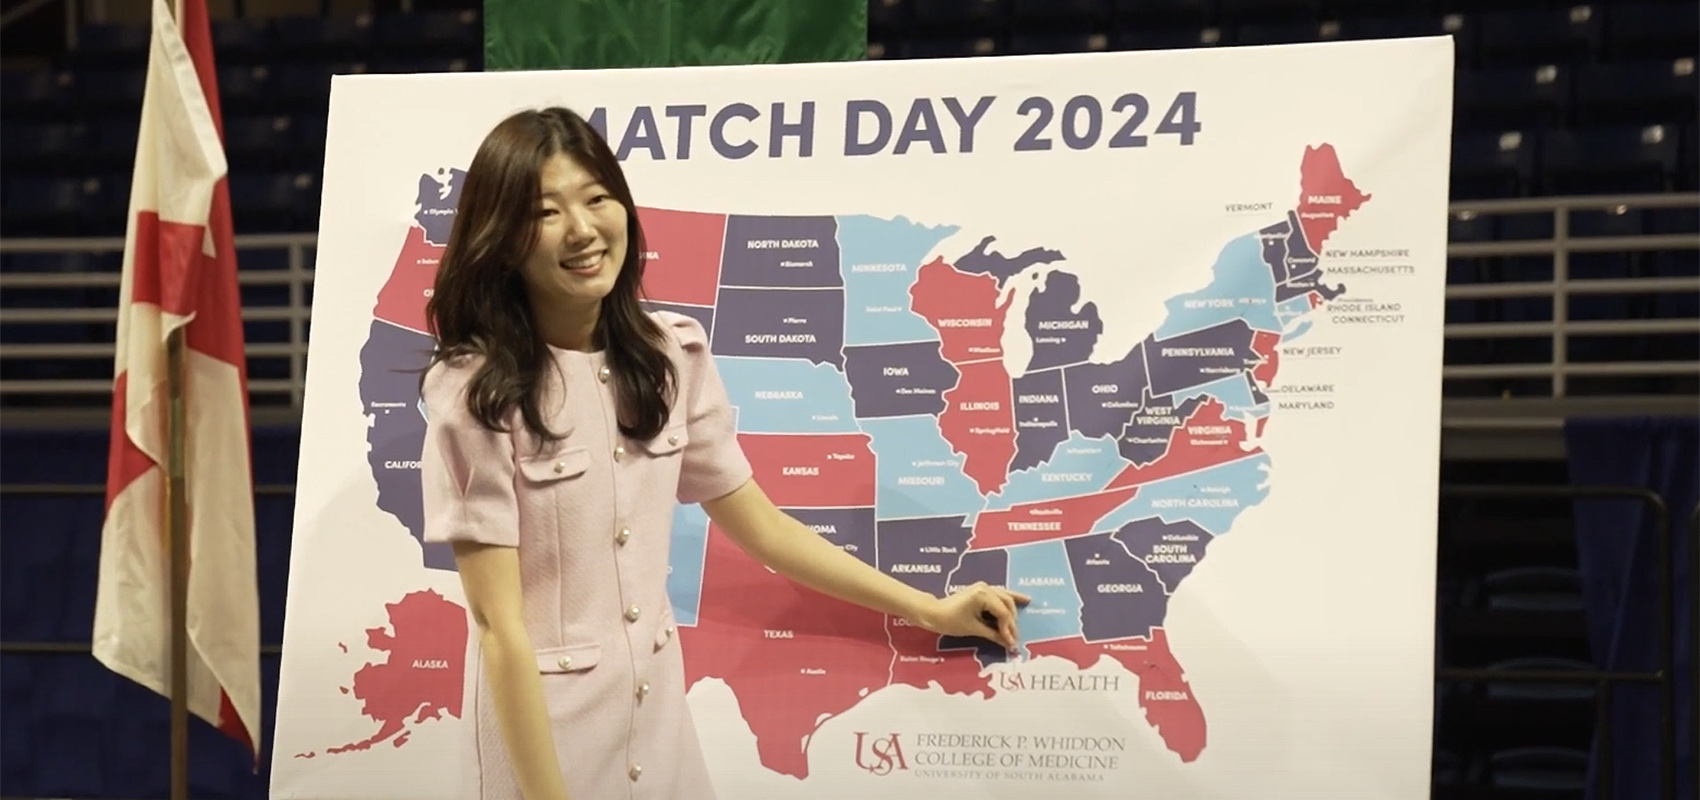 The Whiddon College of Medicine's Match Day in 2024